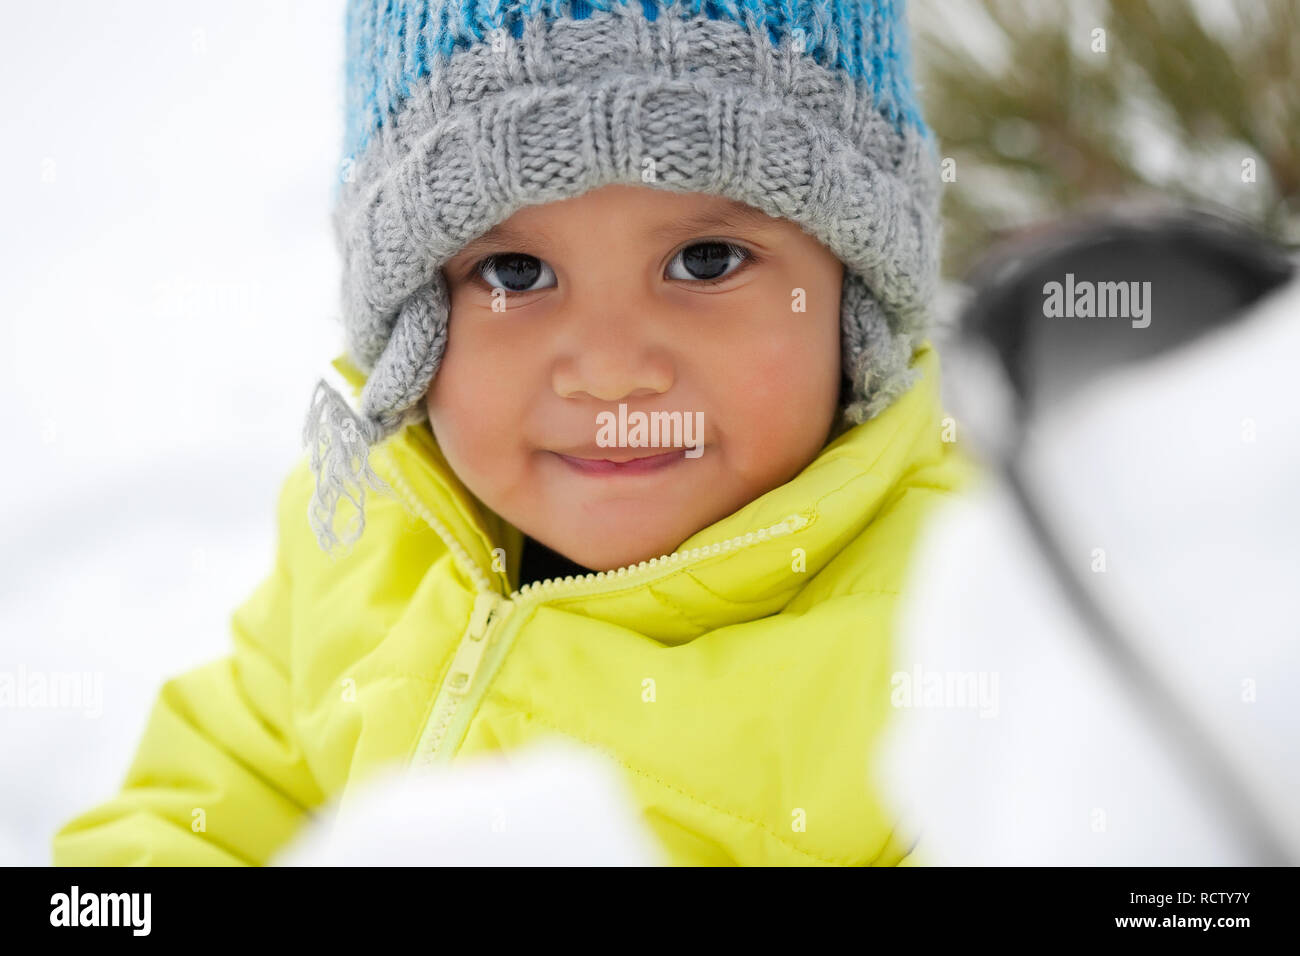 Cute Latino toddler smiling while playing in the snow during winter and wearing a knit hat. Stock Photo